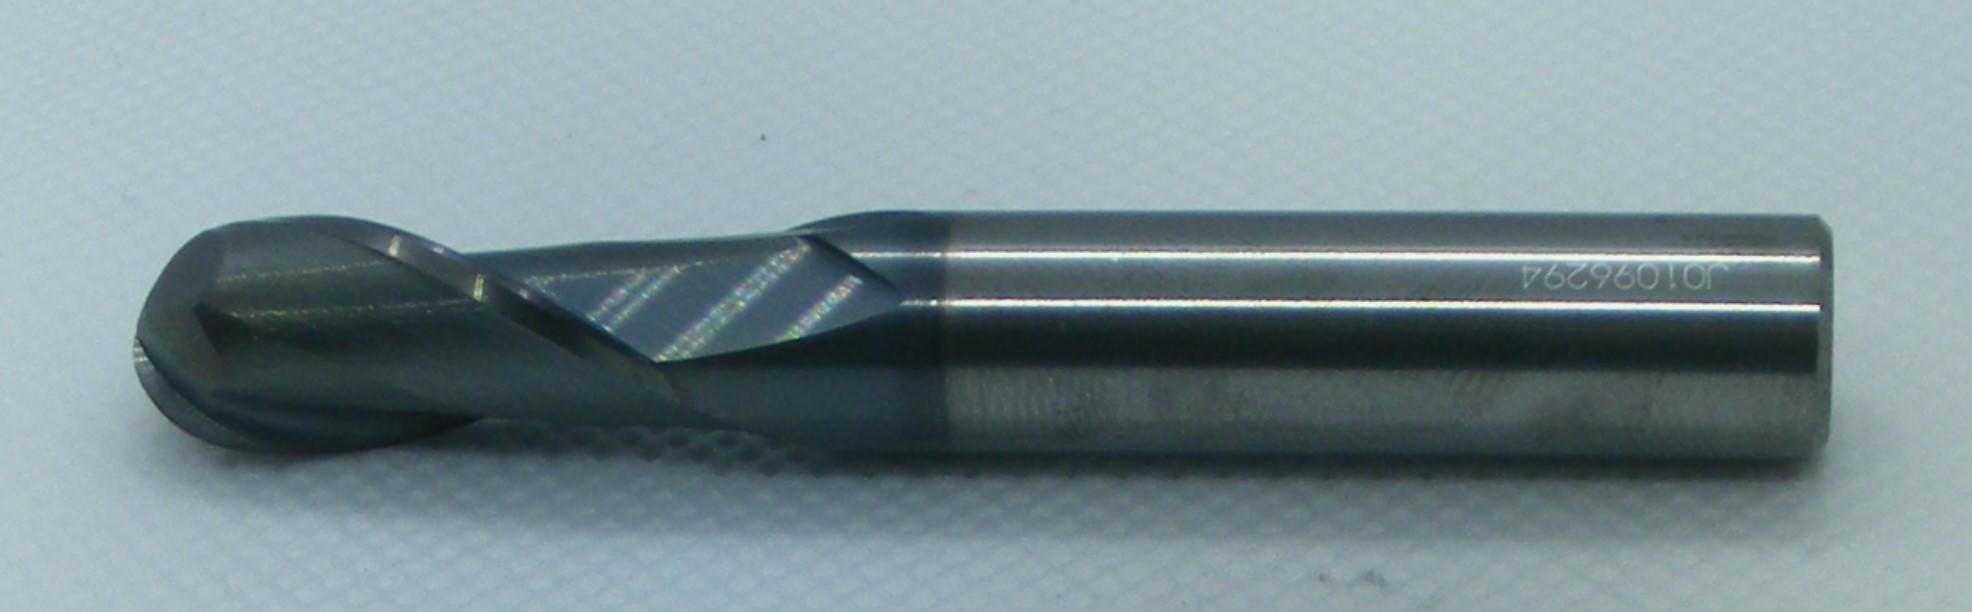 8mm HSSCO8 TiAlN coated end mill @-@ QUALITY @-@ 